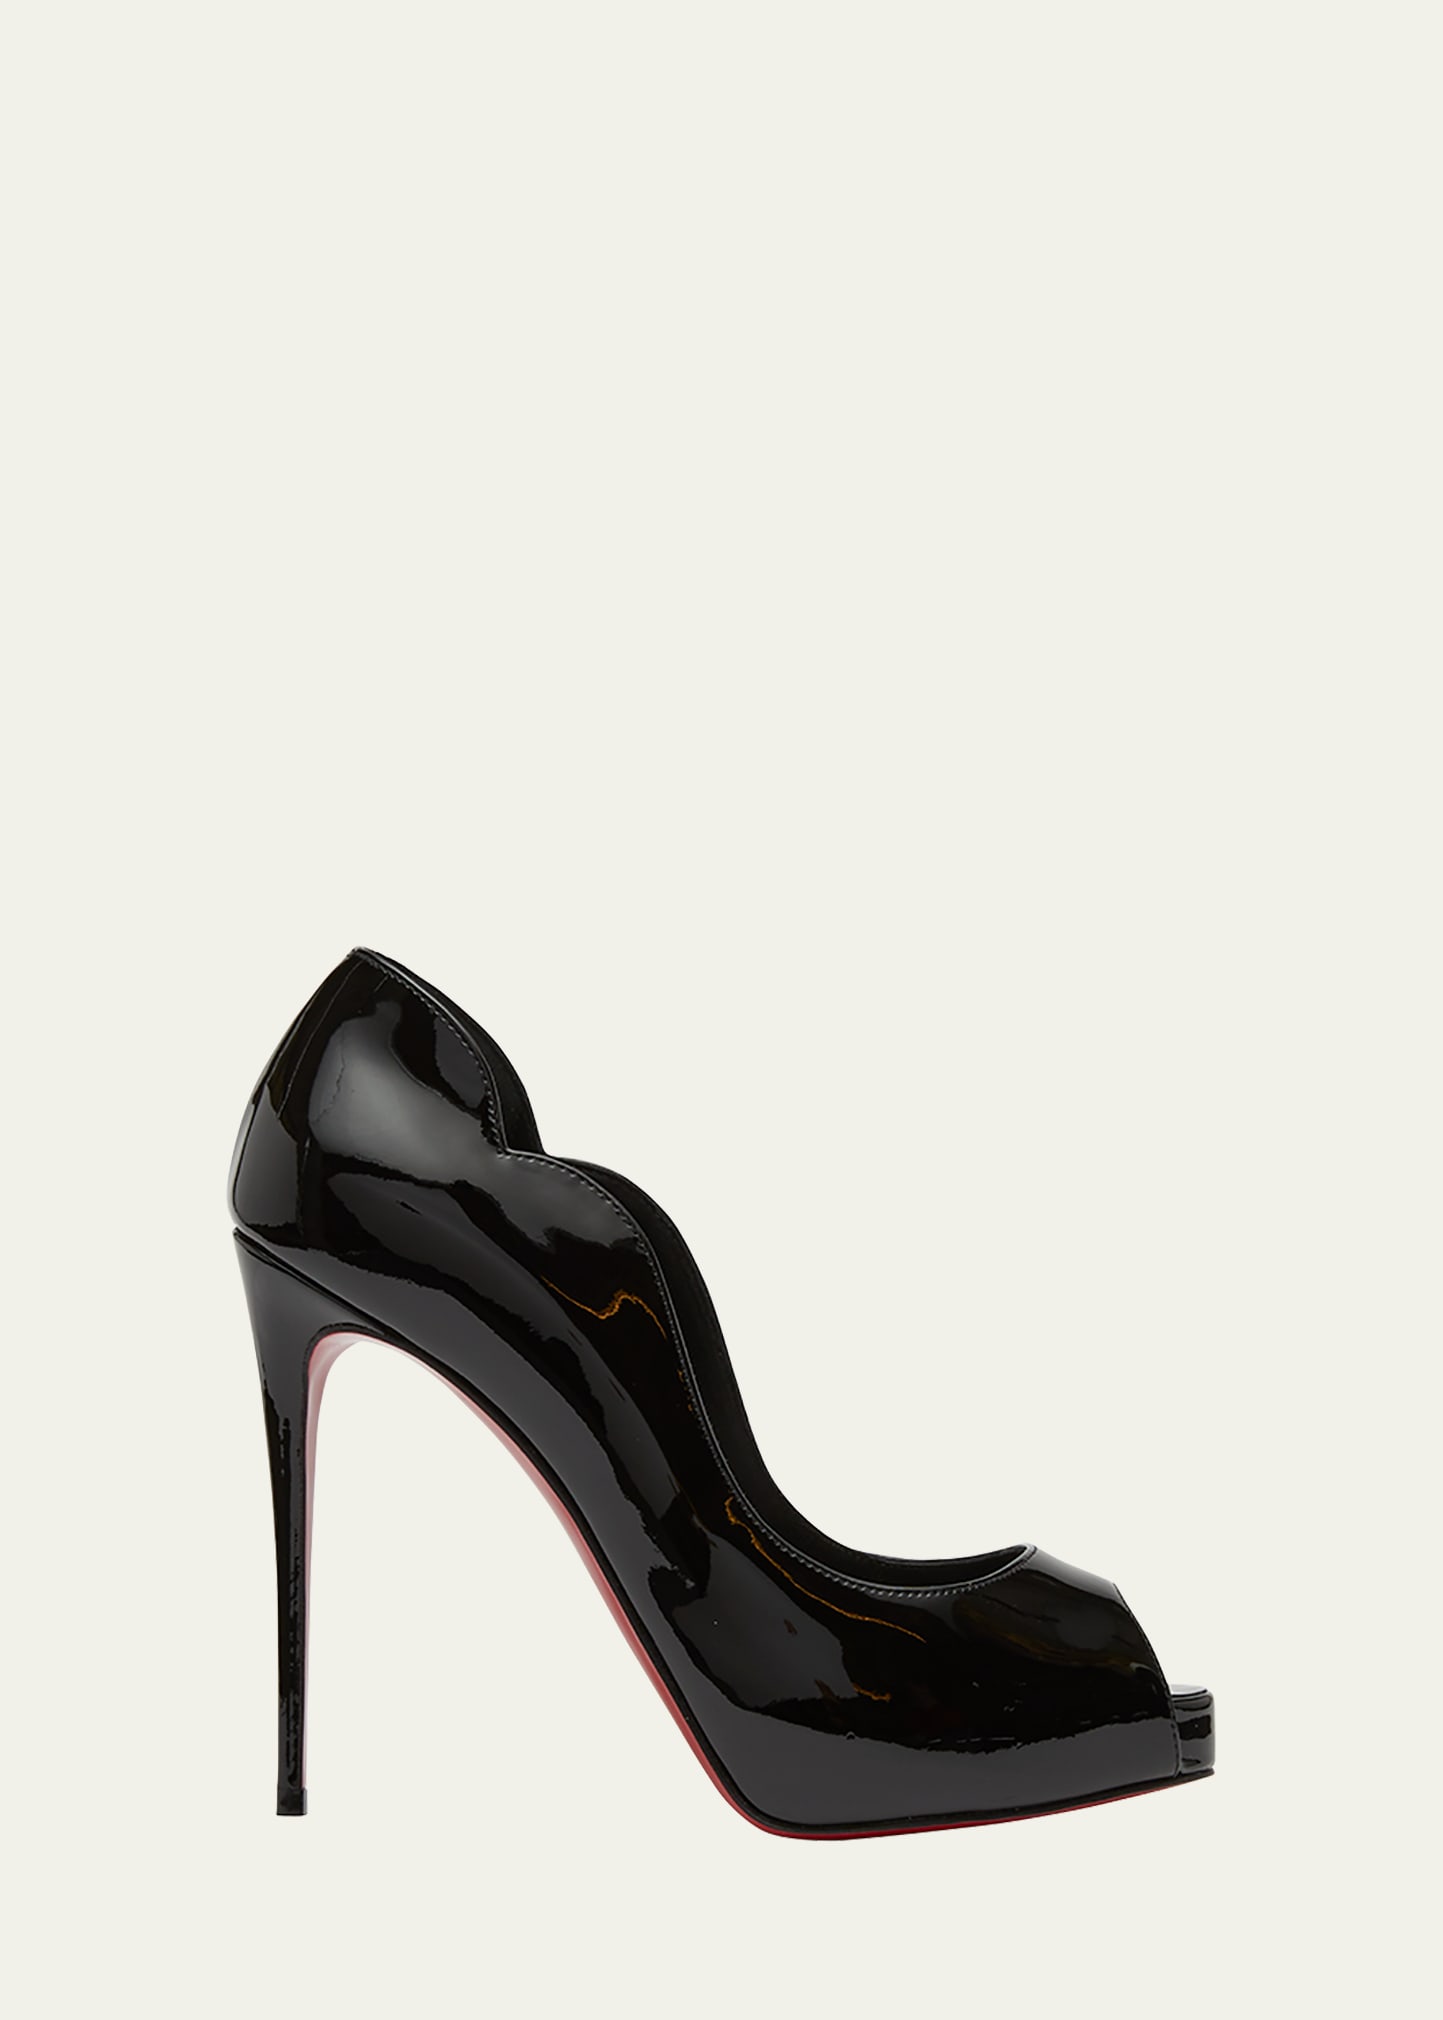 Christian Louboutin Hot Chick Patent Red Sole Pumps In Blacklin Black